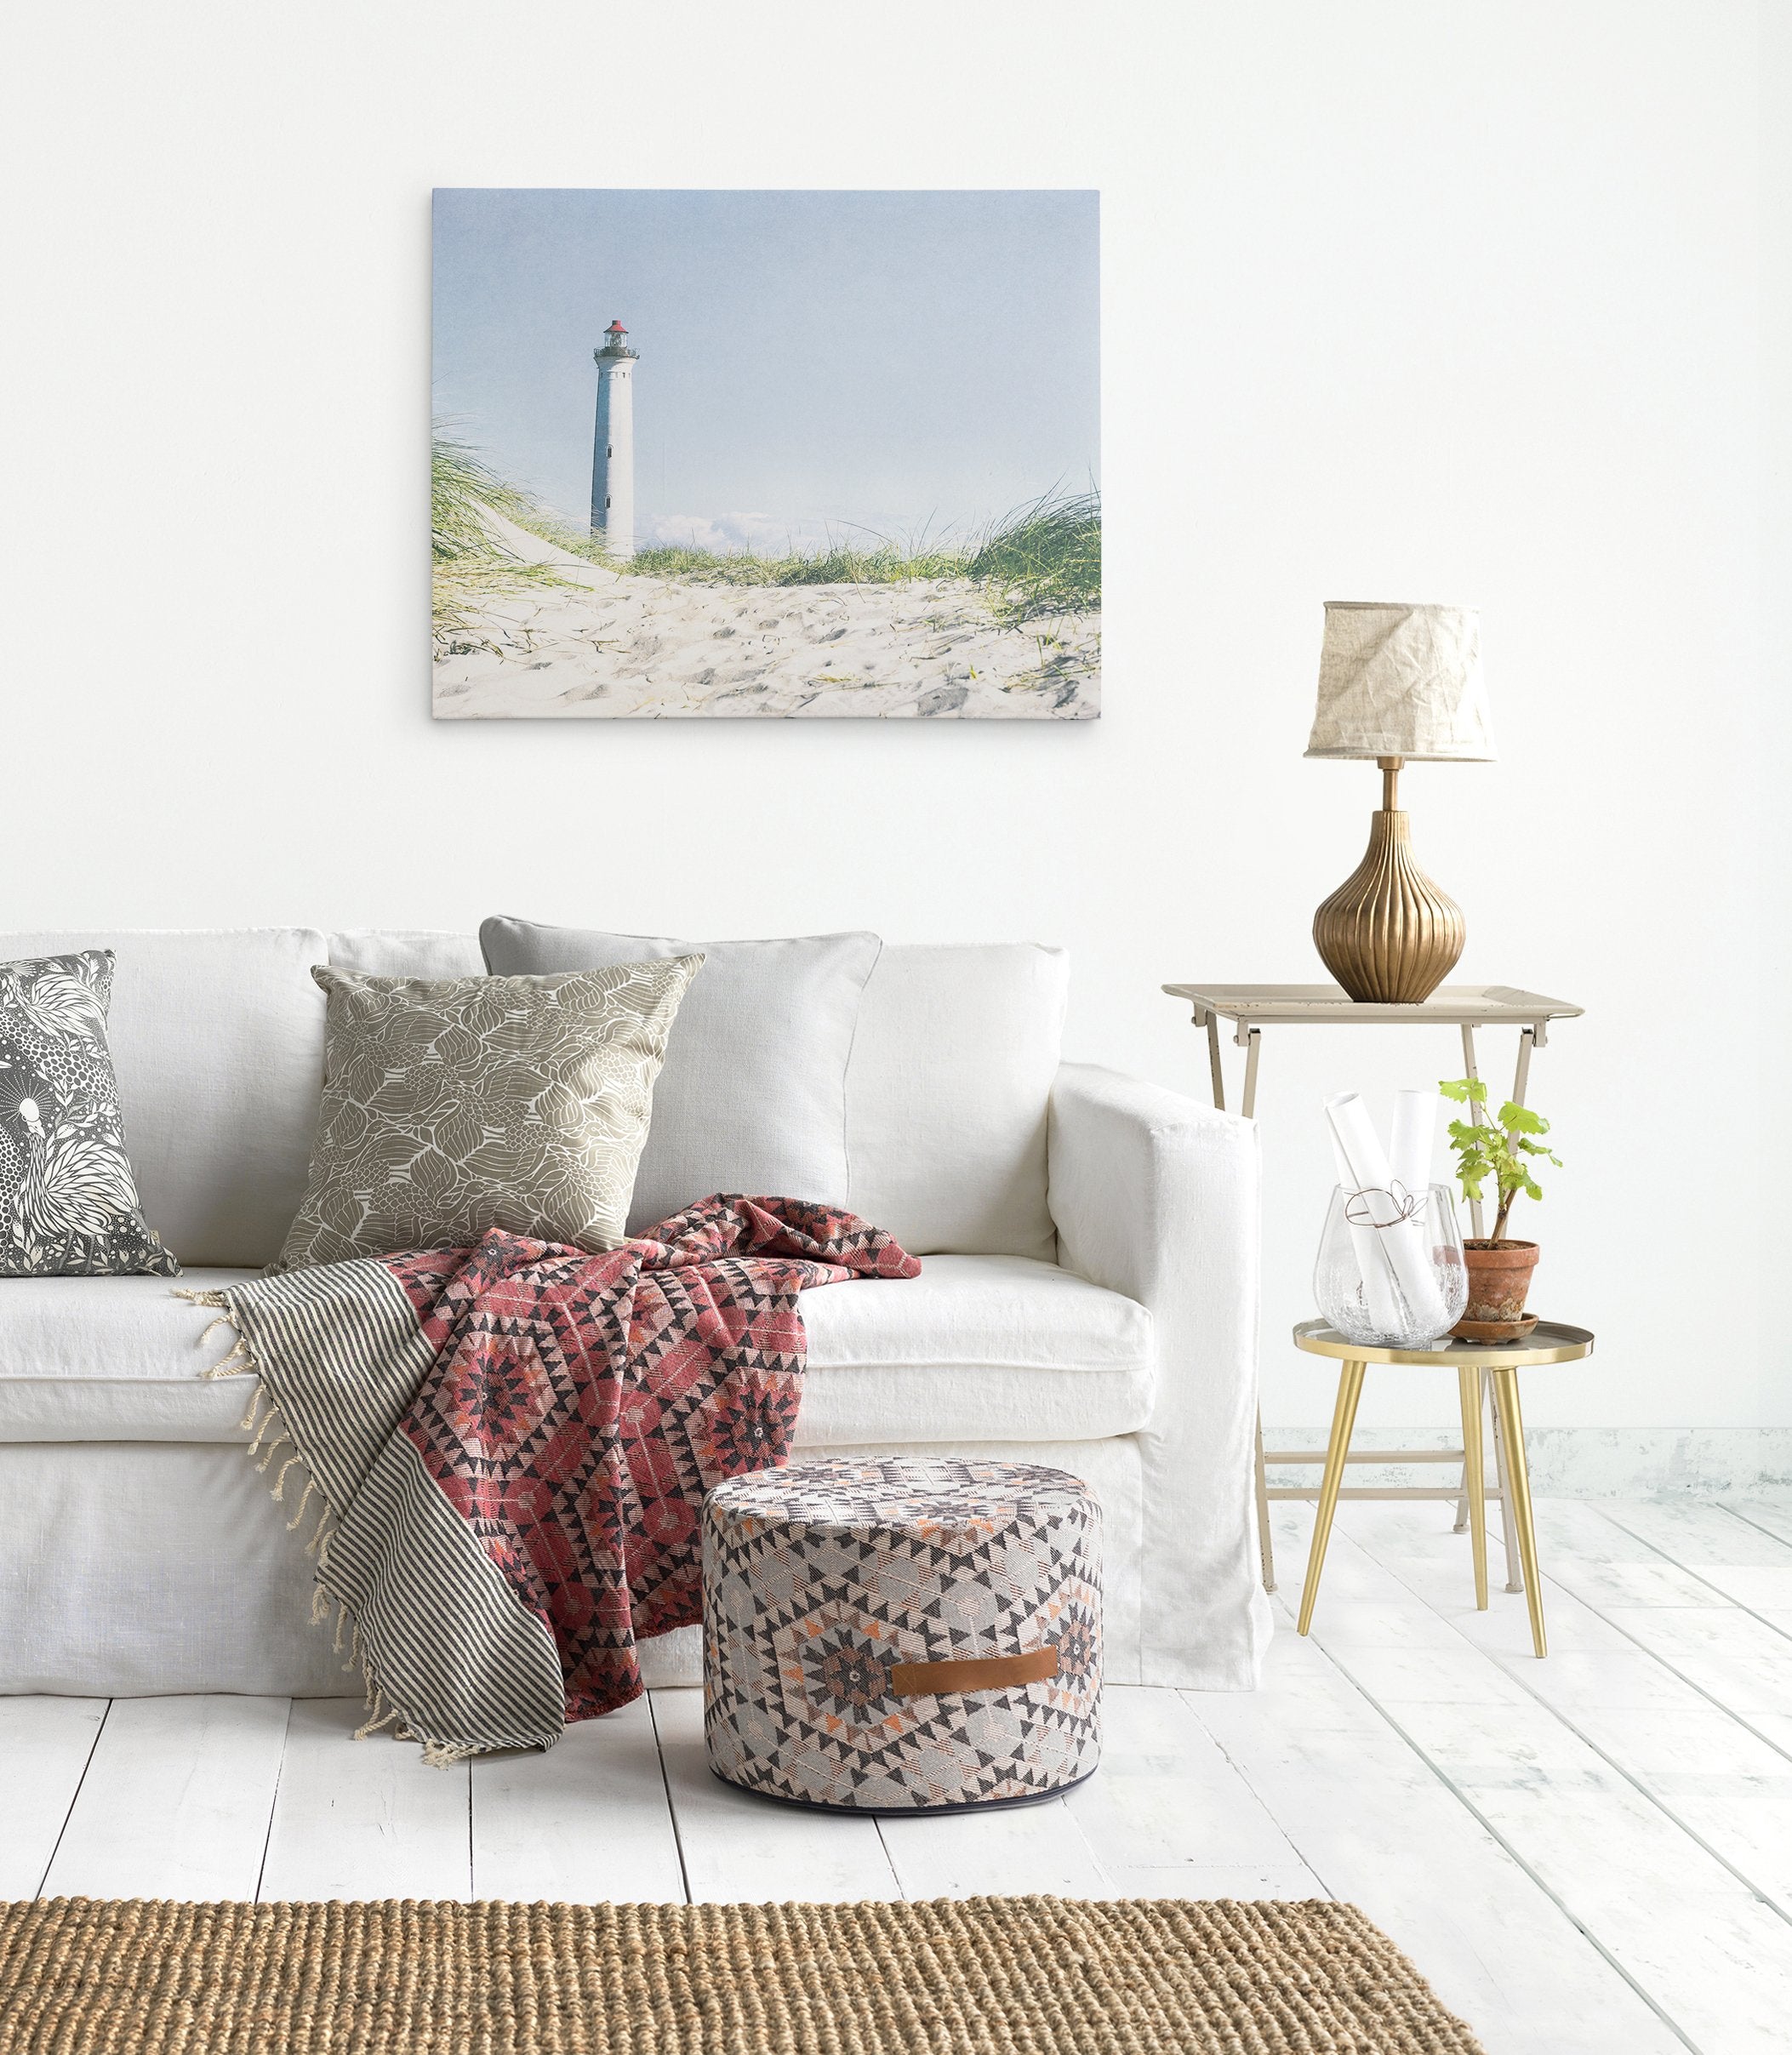 Canvas print of a lighthouse in a coastal themed living room